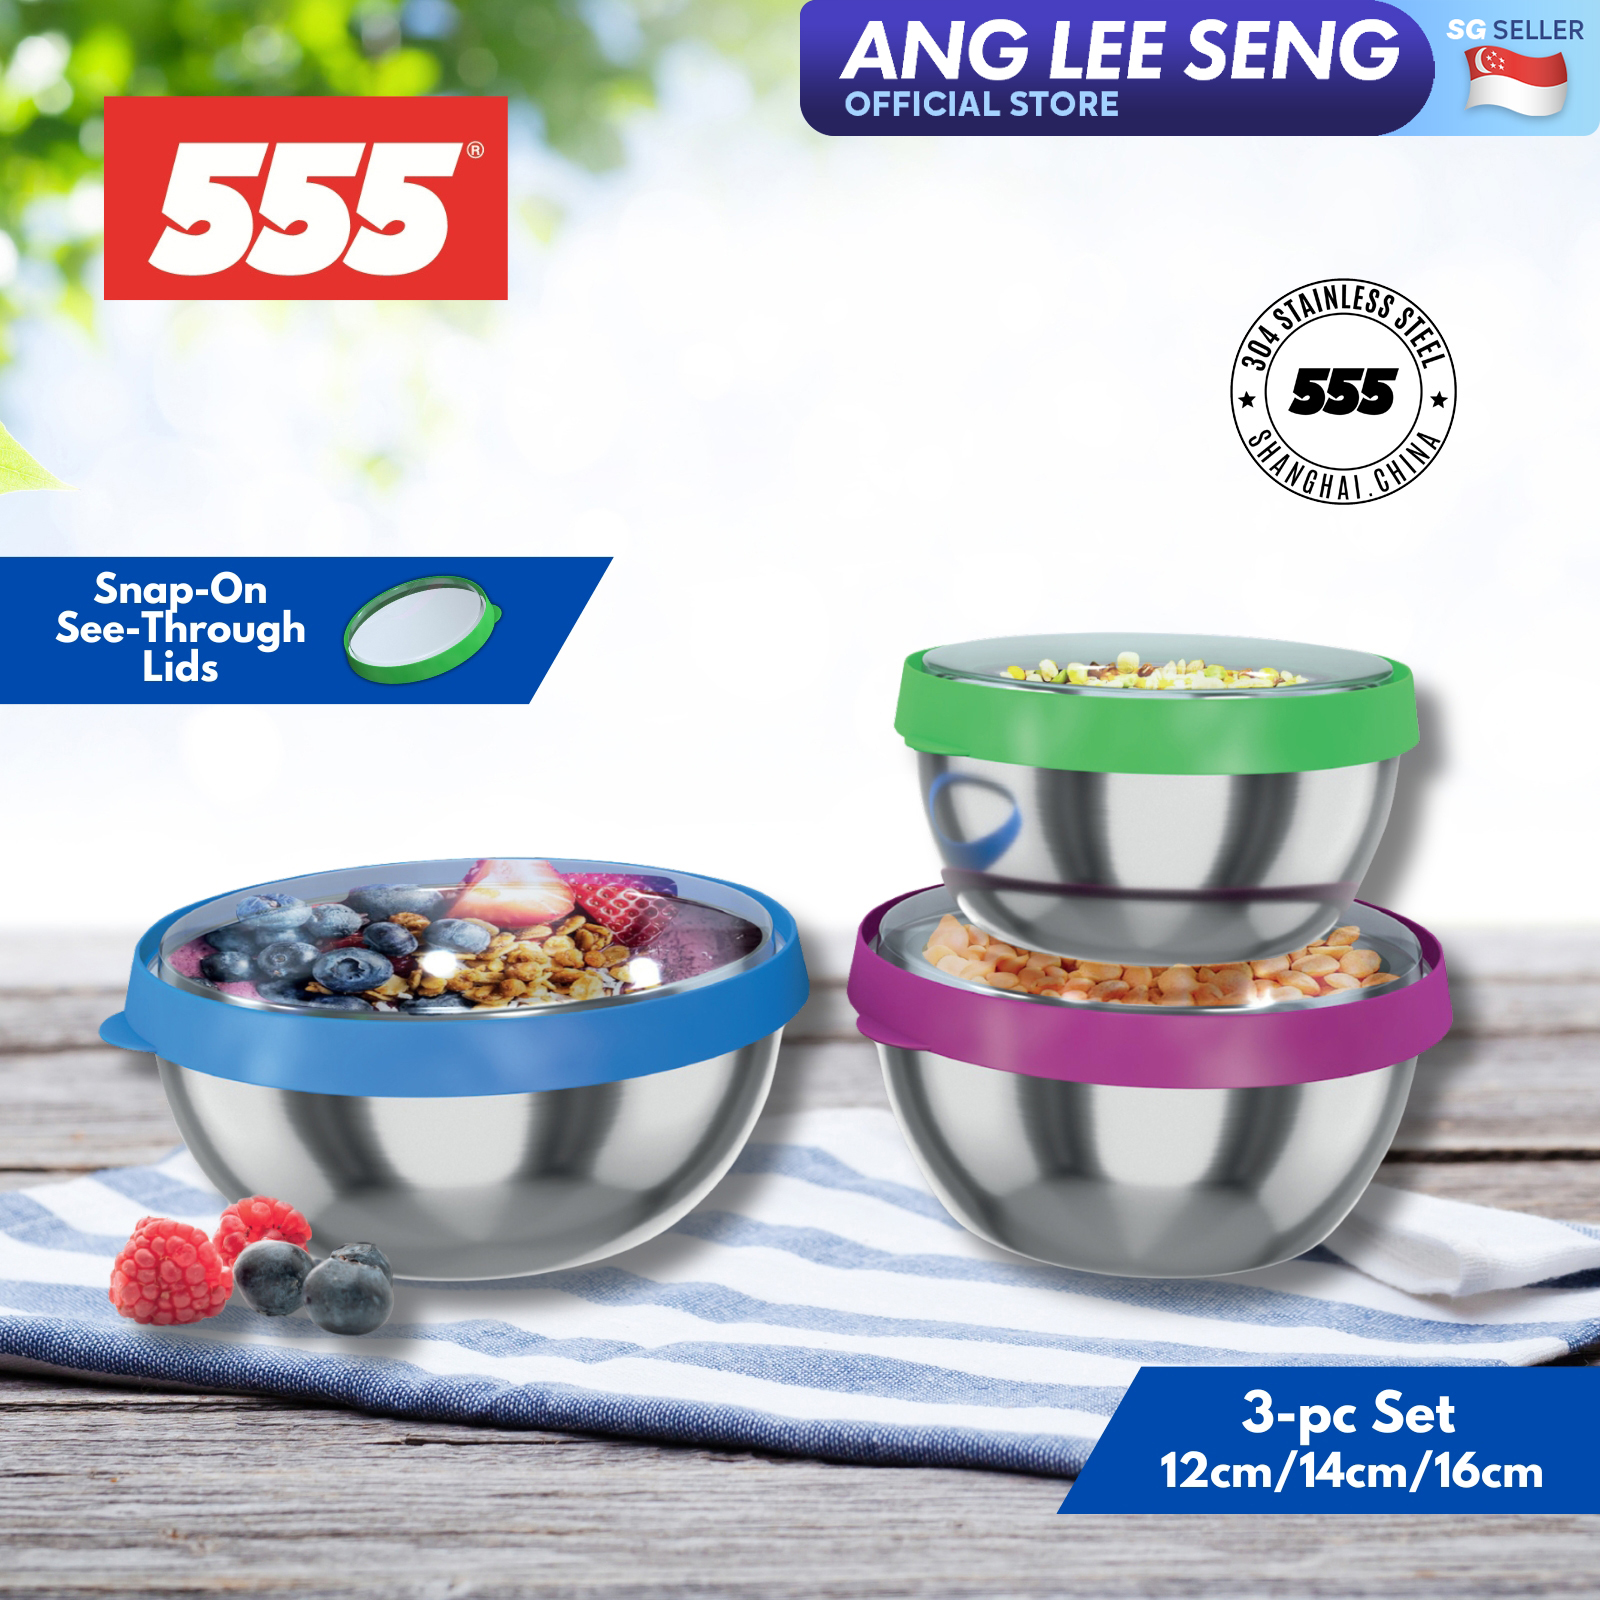 555 Stainless Steel Bowl With Snap-On Lid 3-pc Set - 12cm/14cm/16cm